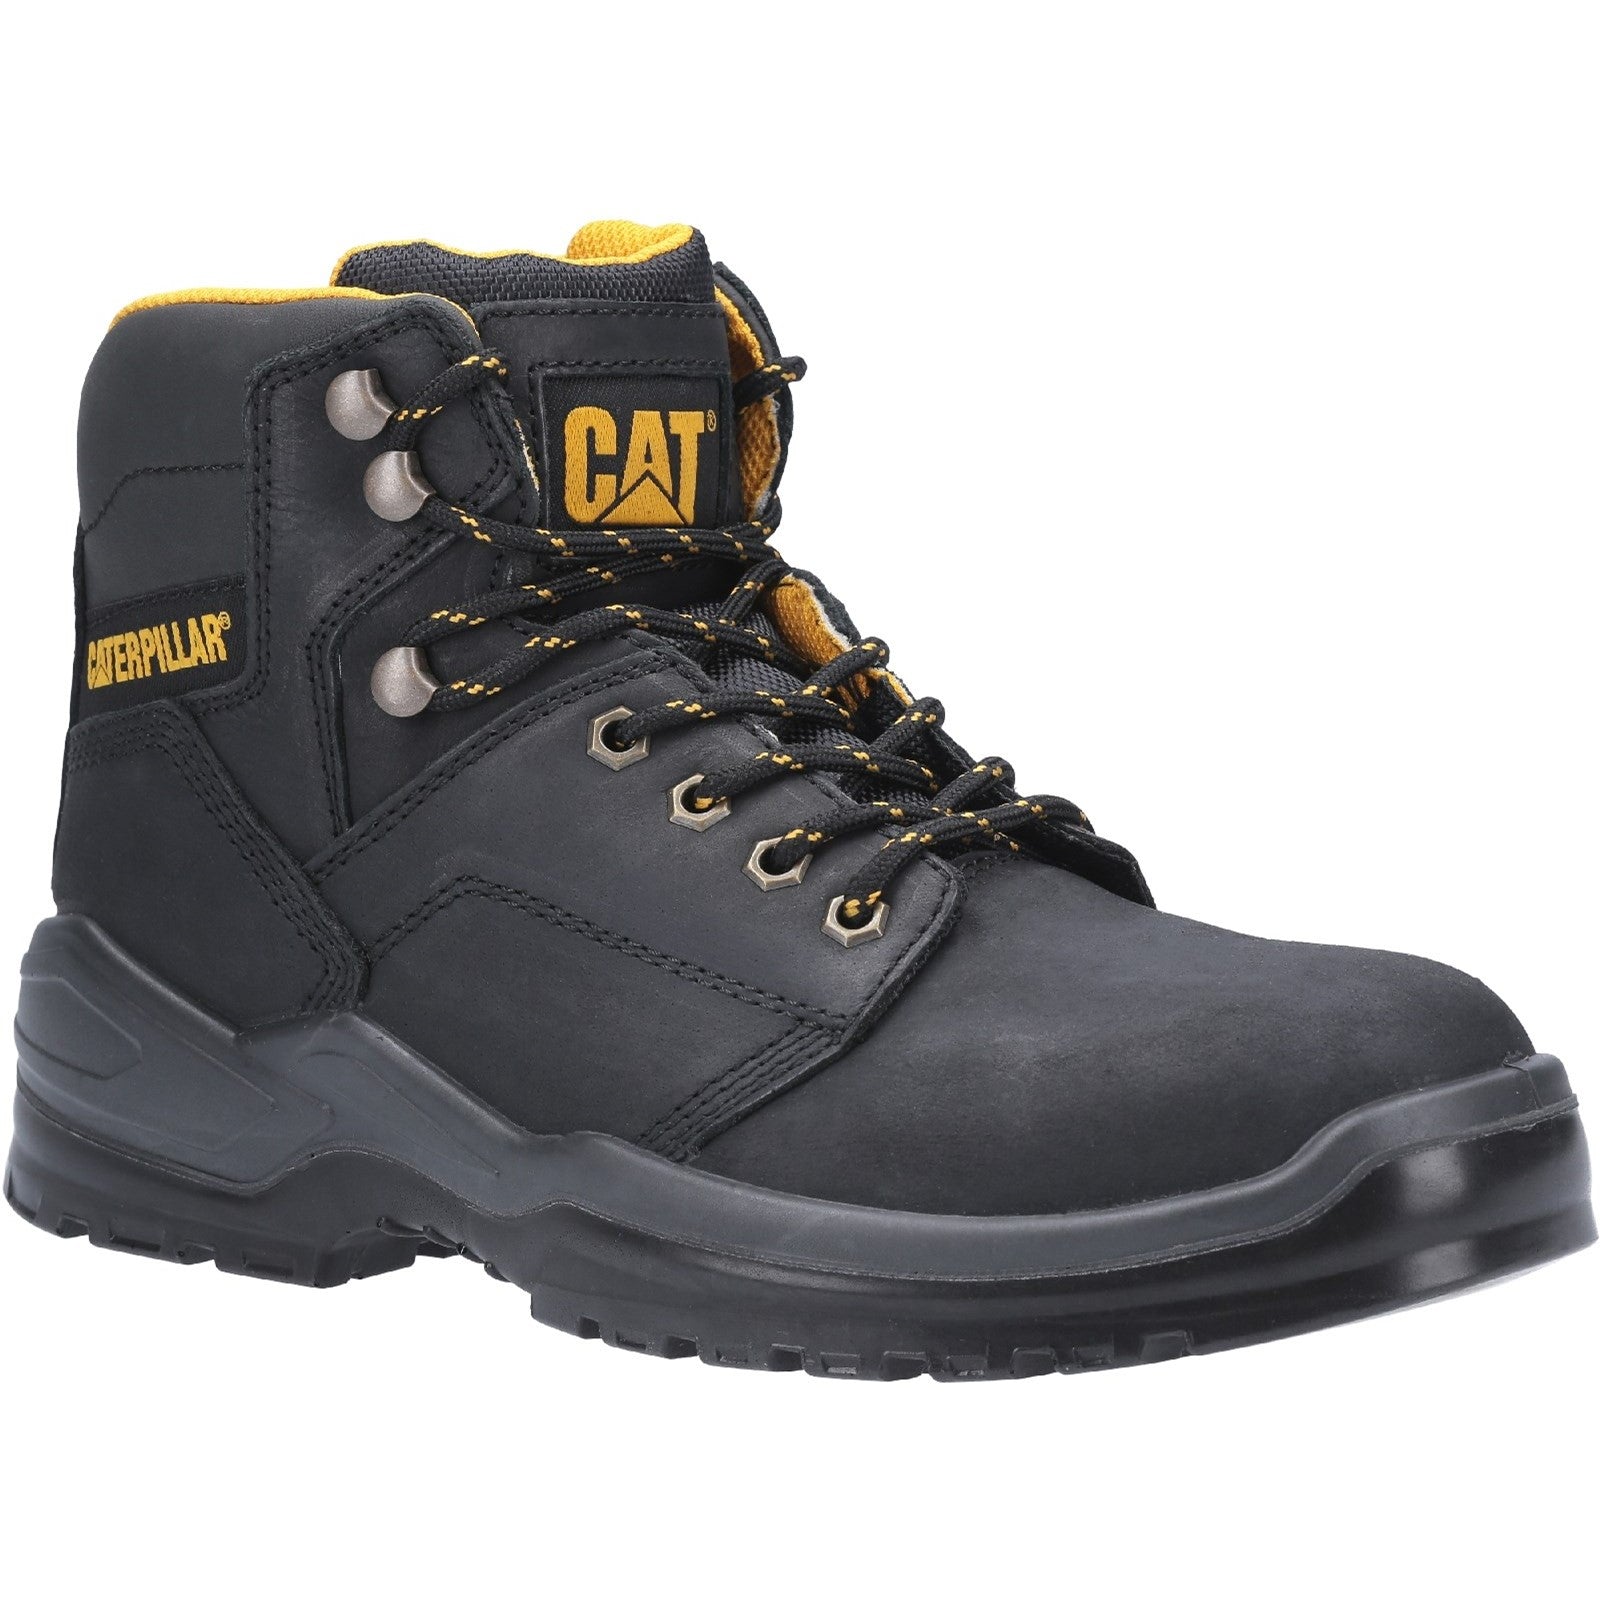 CAT Striver S3 Safety Boot